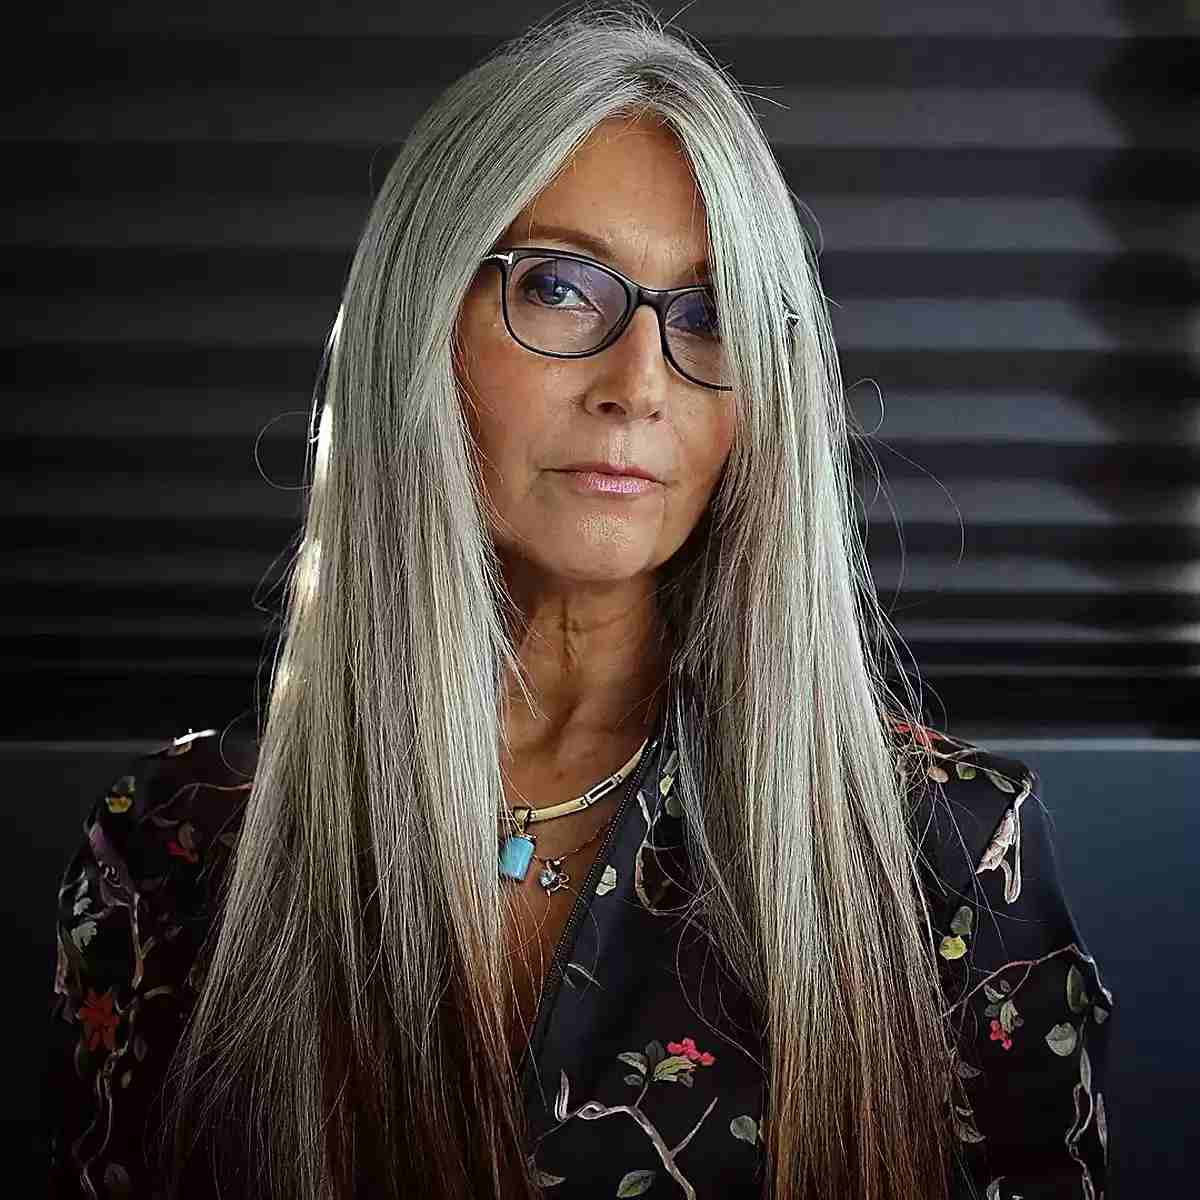 Sleek Long Hair with Long Bangs and Face Frame for Ladies Over 50 Wearing Glasses